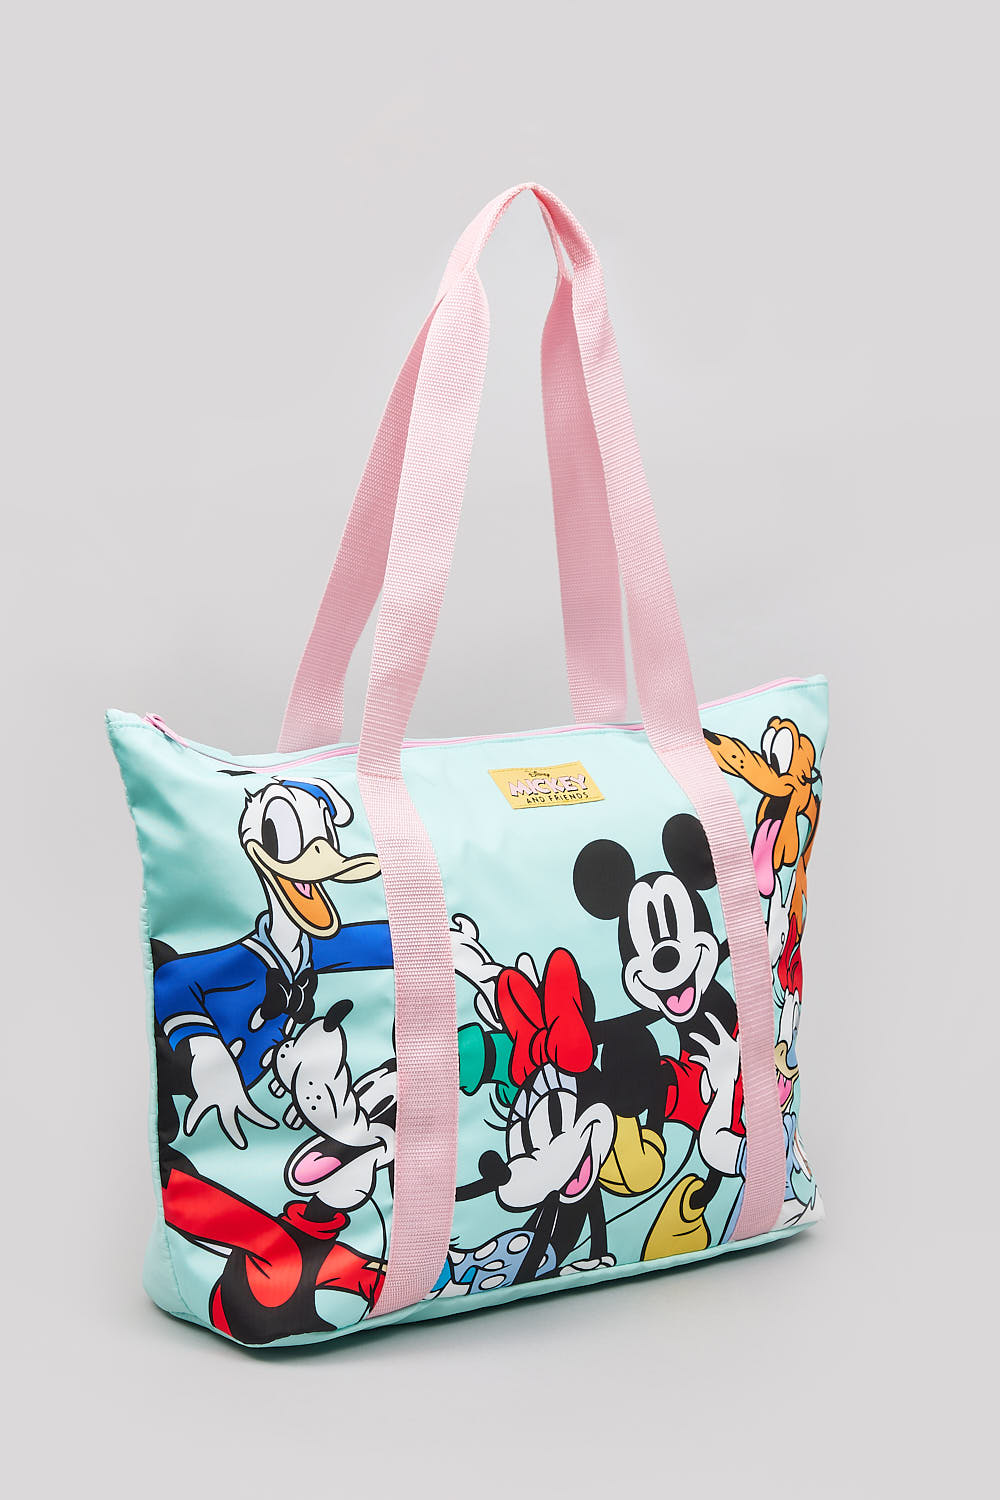 MICKEY AND FRIENDS ‘STRIKE A POSE’ LARGE TOTE BAG